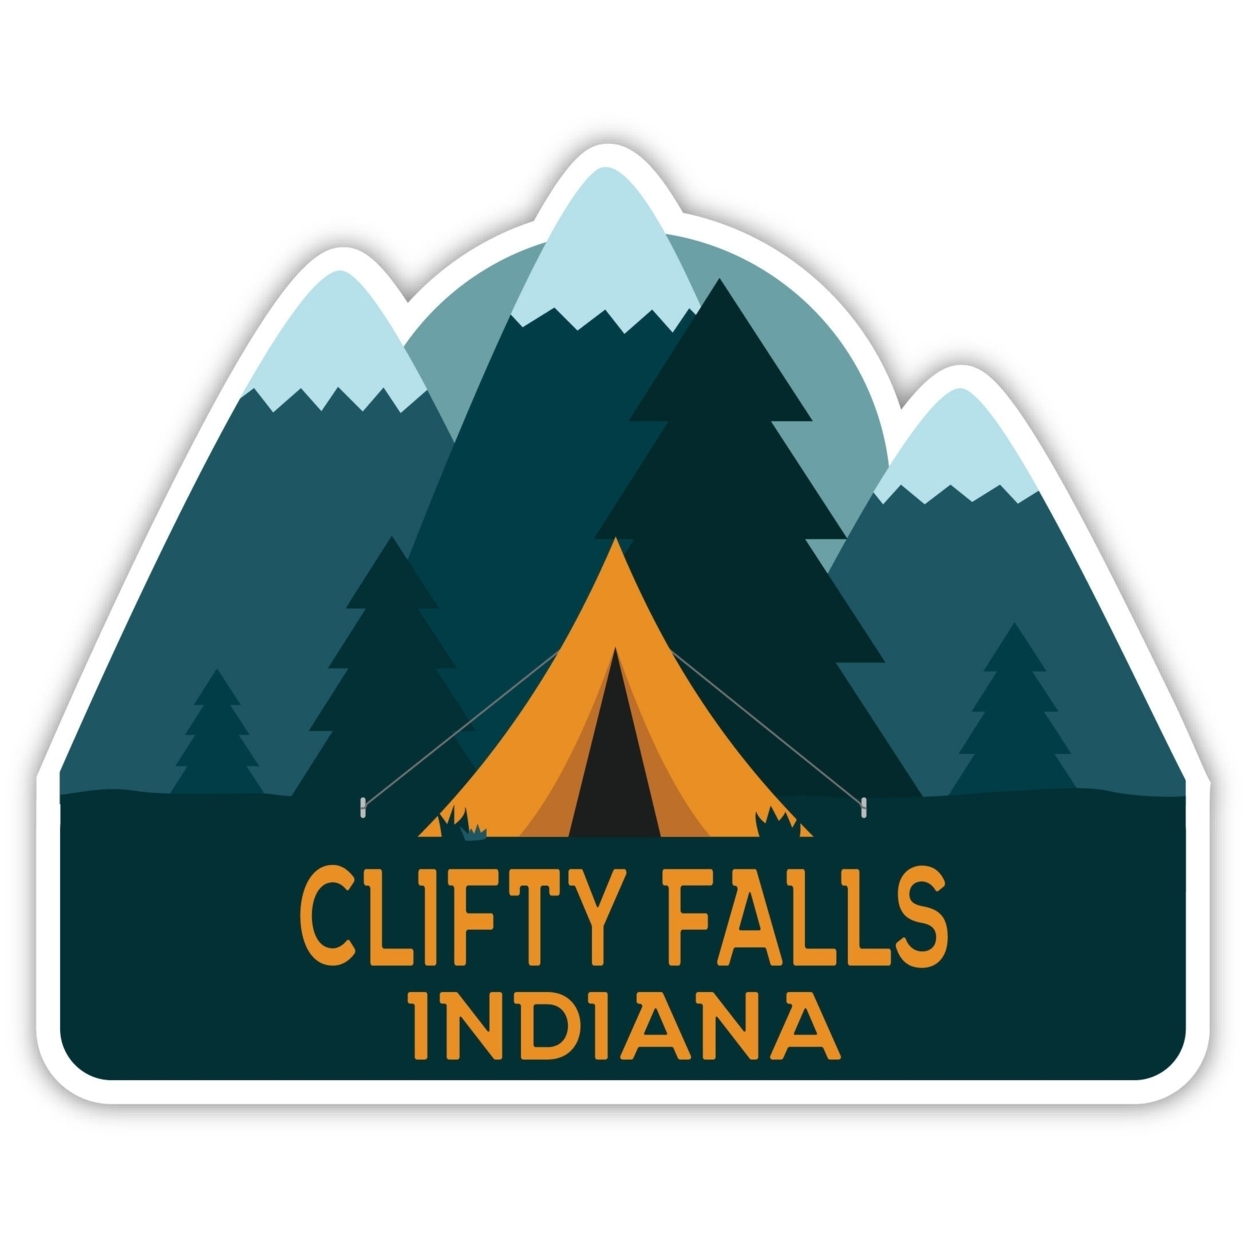 Clifty Falls Indiana Souvenir Decorative Stickers (Choose Theme And Size) - Single Unit, 10-Inch, Tent